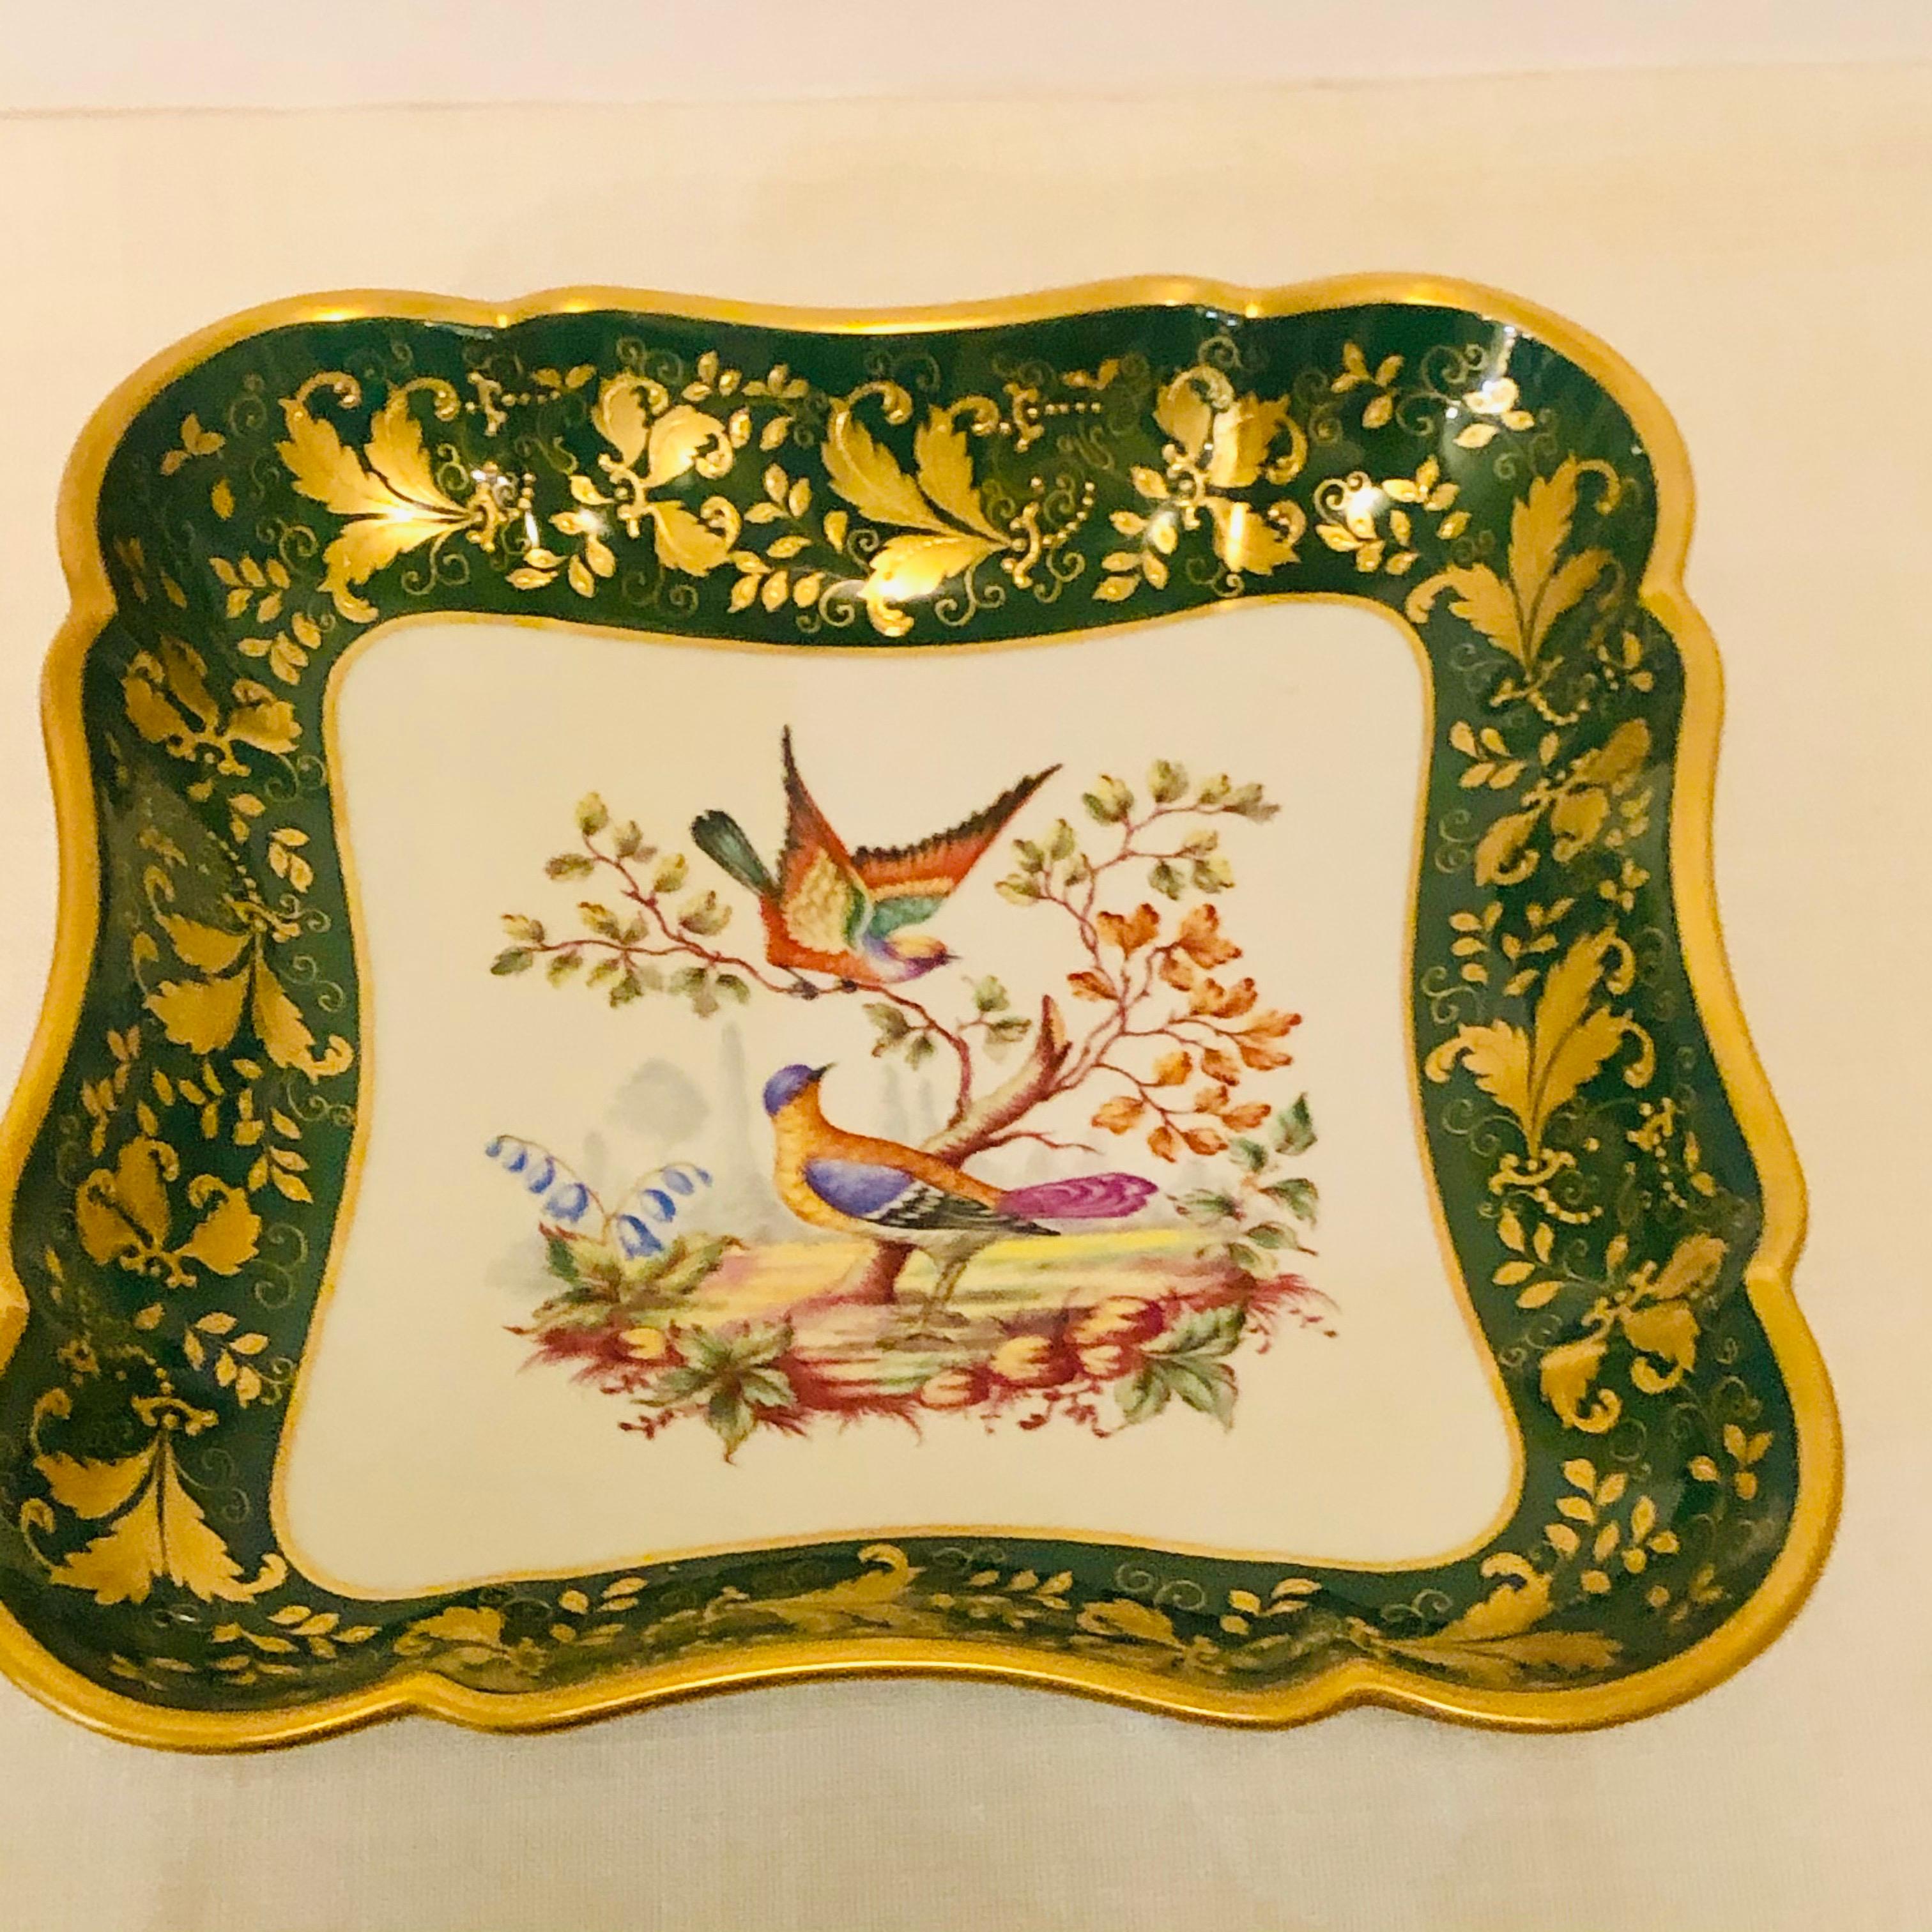 Hand-Painted Le Tallec Green Bowl Painted with Colorful Birds with a Raised Gold Border